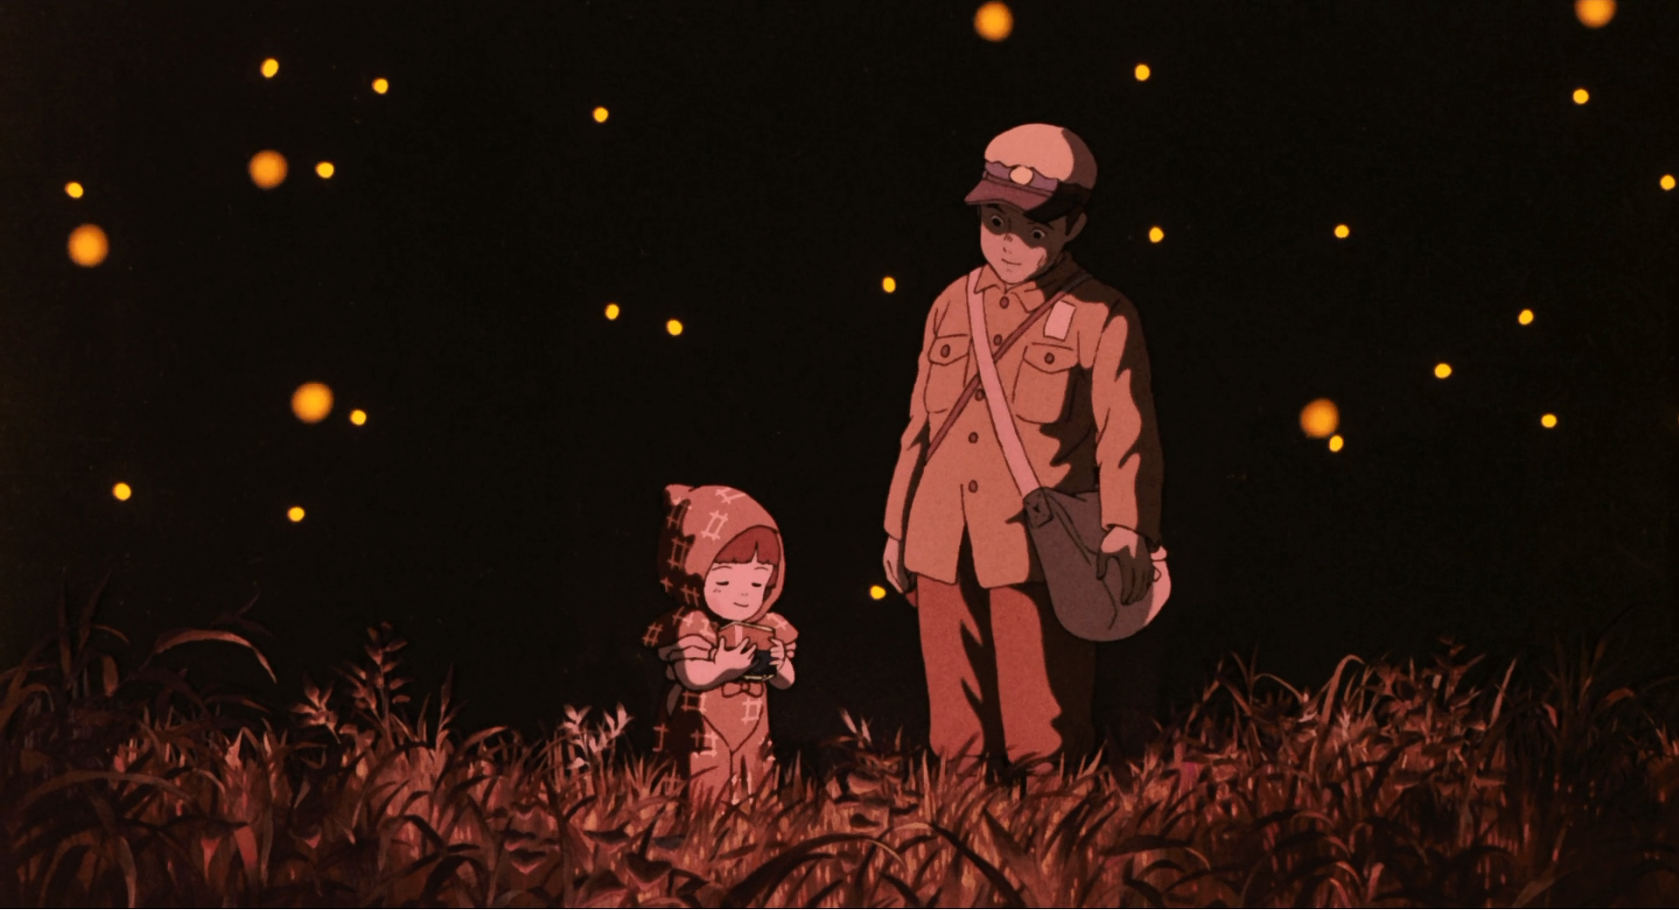 HQ Grave Of The Fireflies Wallpapers | File 1929.4Kb